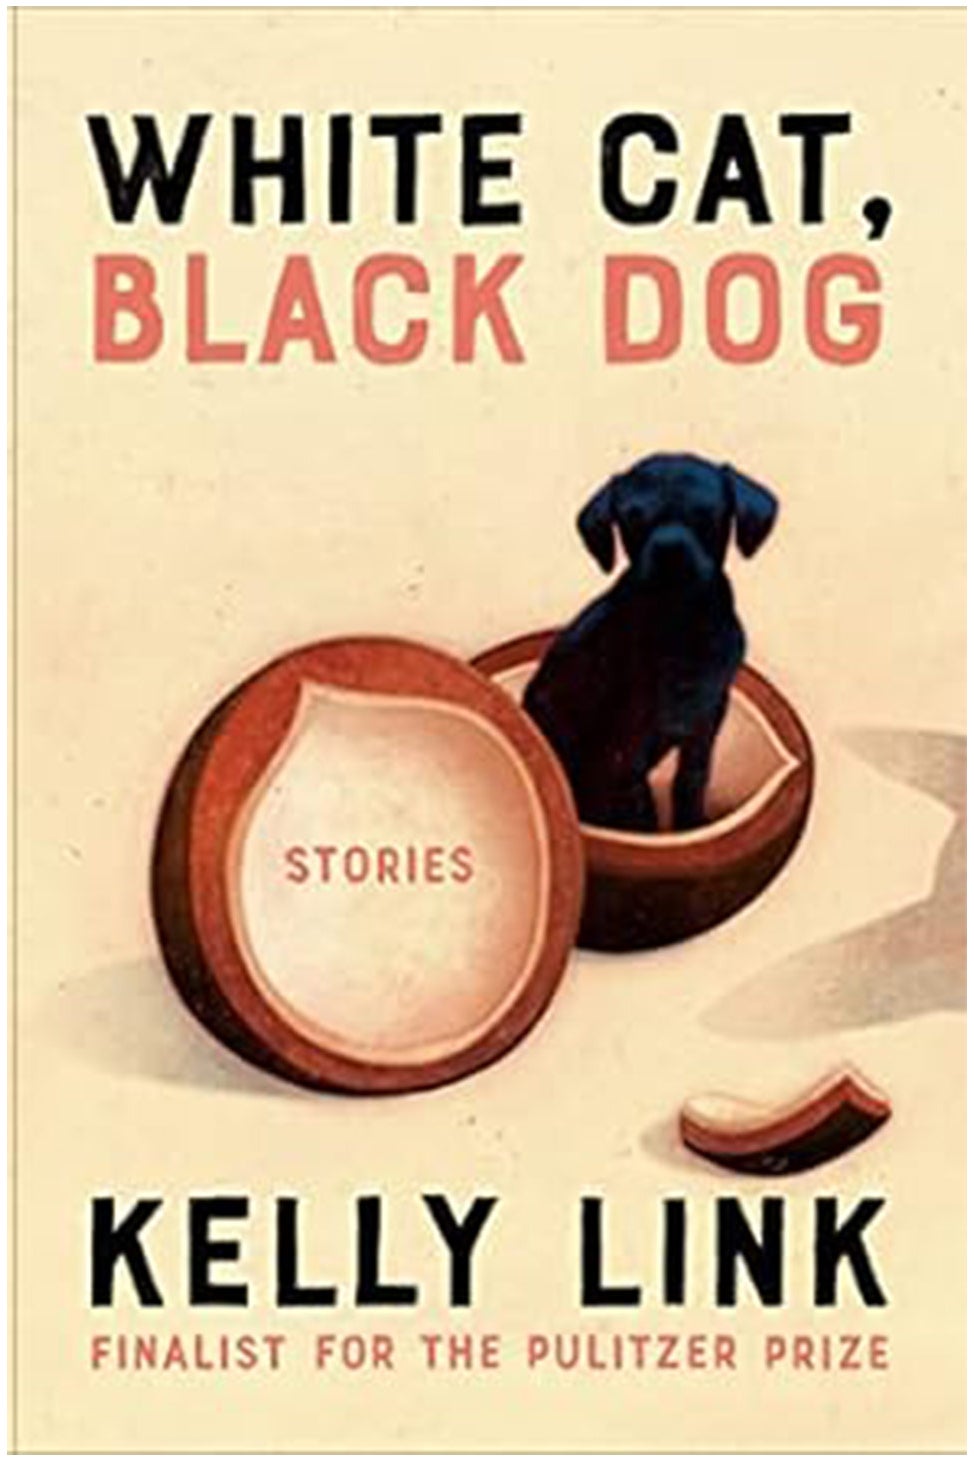 A book jacket has a little black dog breaking out of a nutshell.